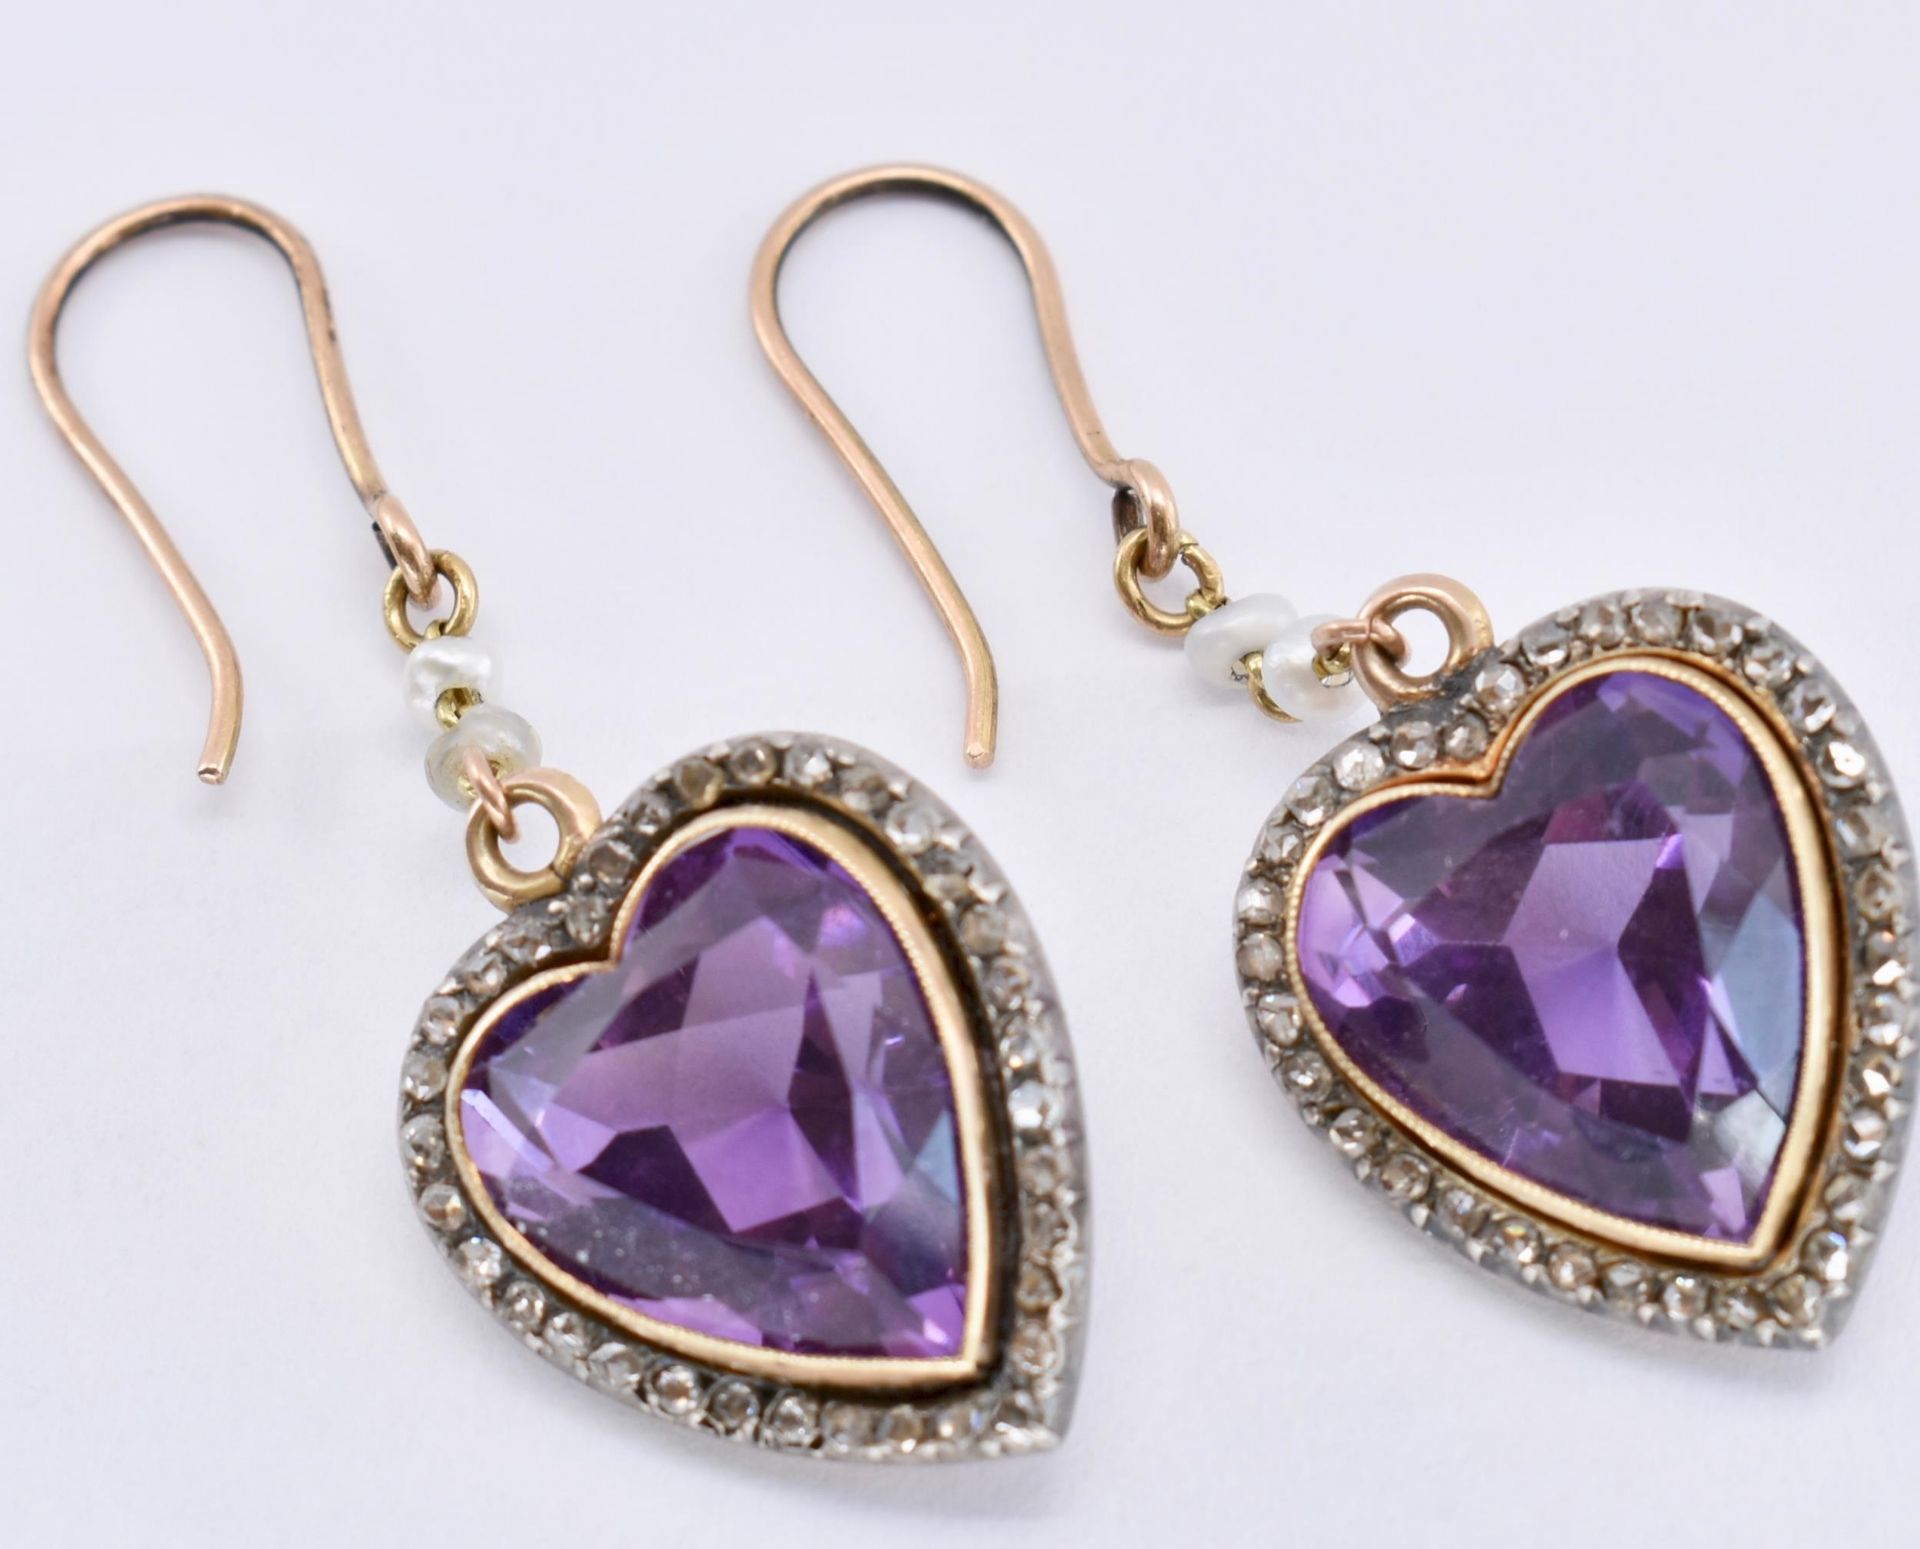 ANTIQUE 15CT GOLD AMETHYST DIAMOND PEARL EARRINGS - Image 3 of 4